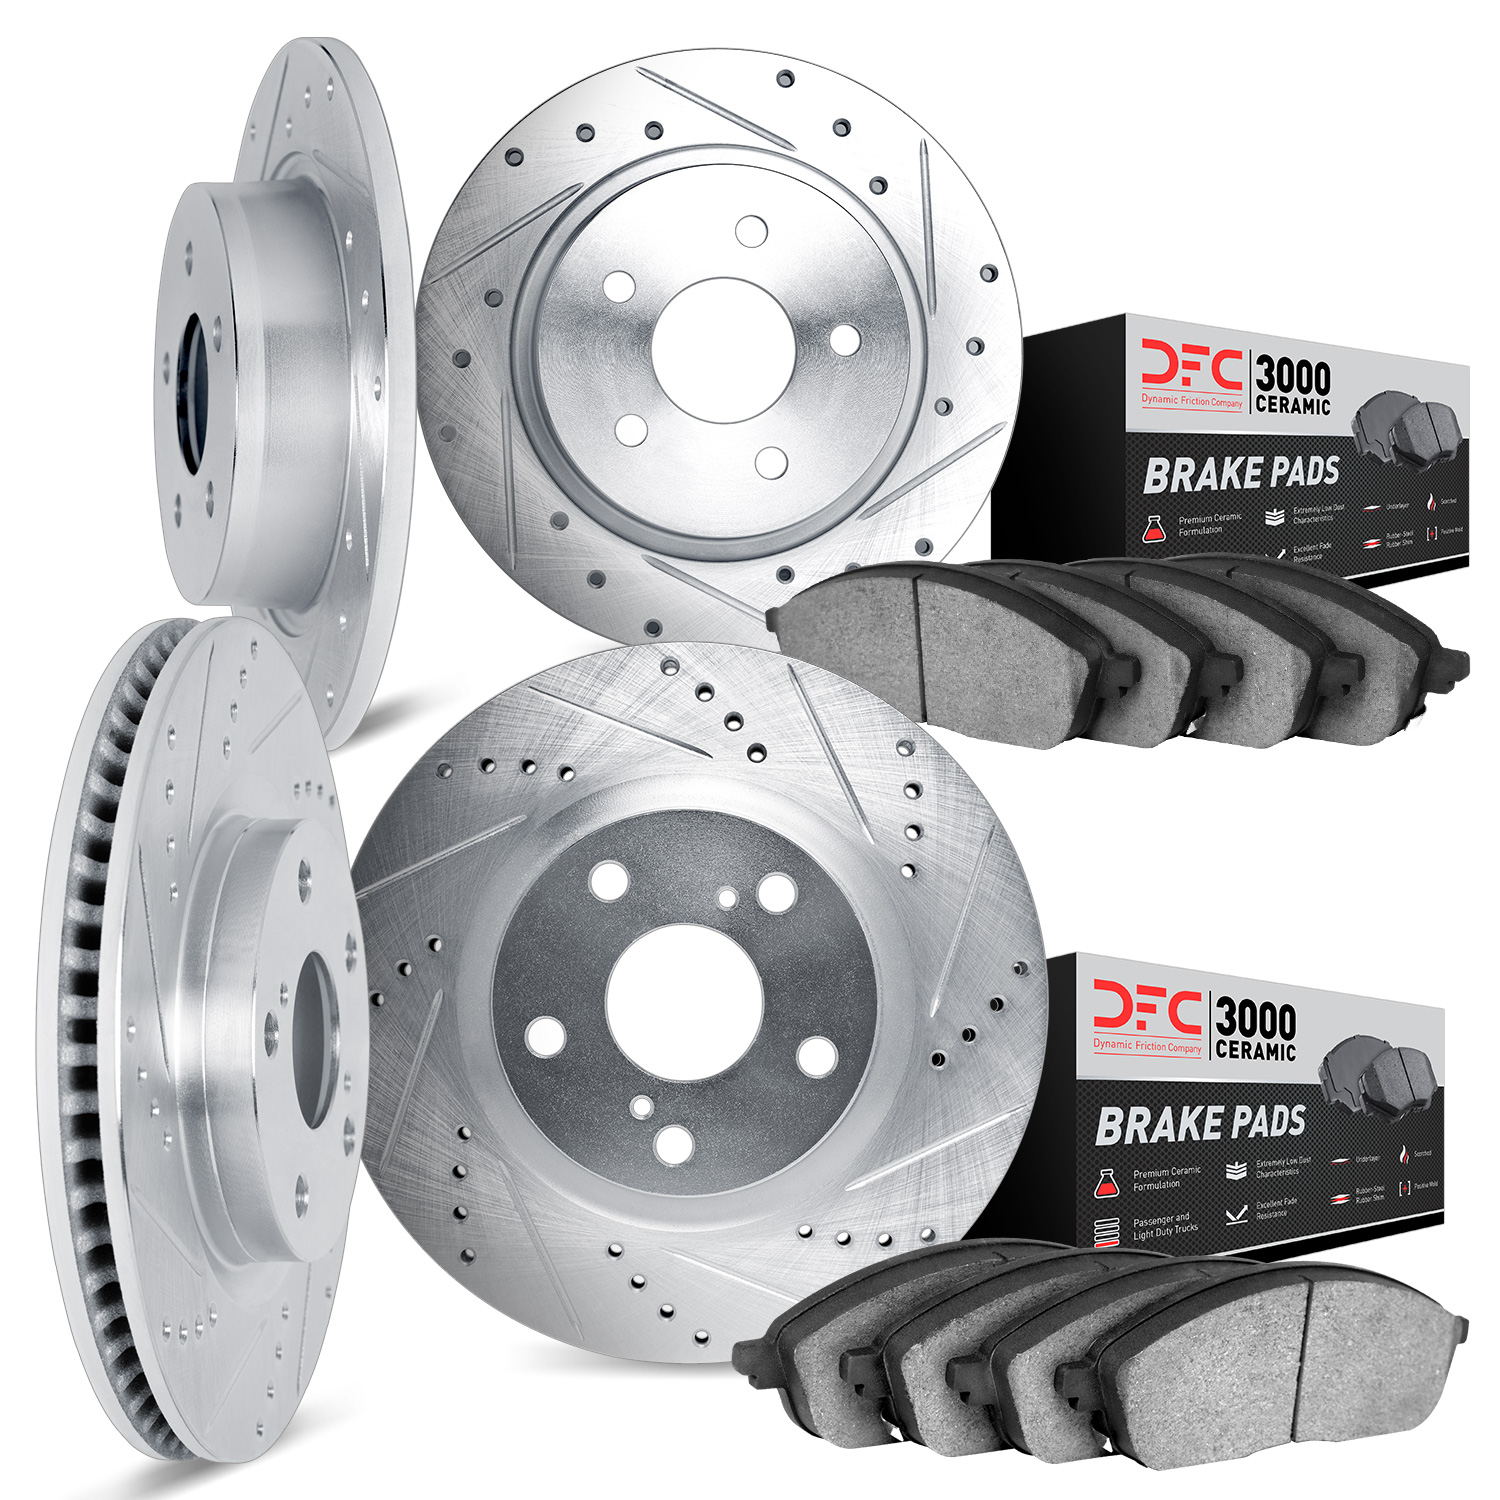 7304-41001 Drilled/Slotted Brake Rotor with 3000-Series Ceramic Brake Pads Kit [Silver], 1998-1998 Mopar, Position: Front and Re